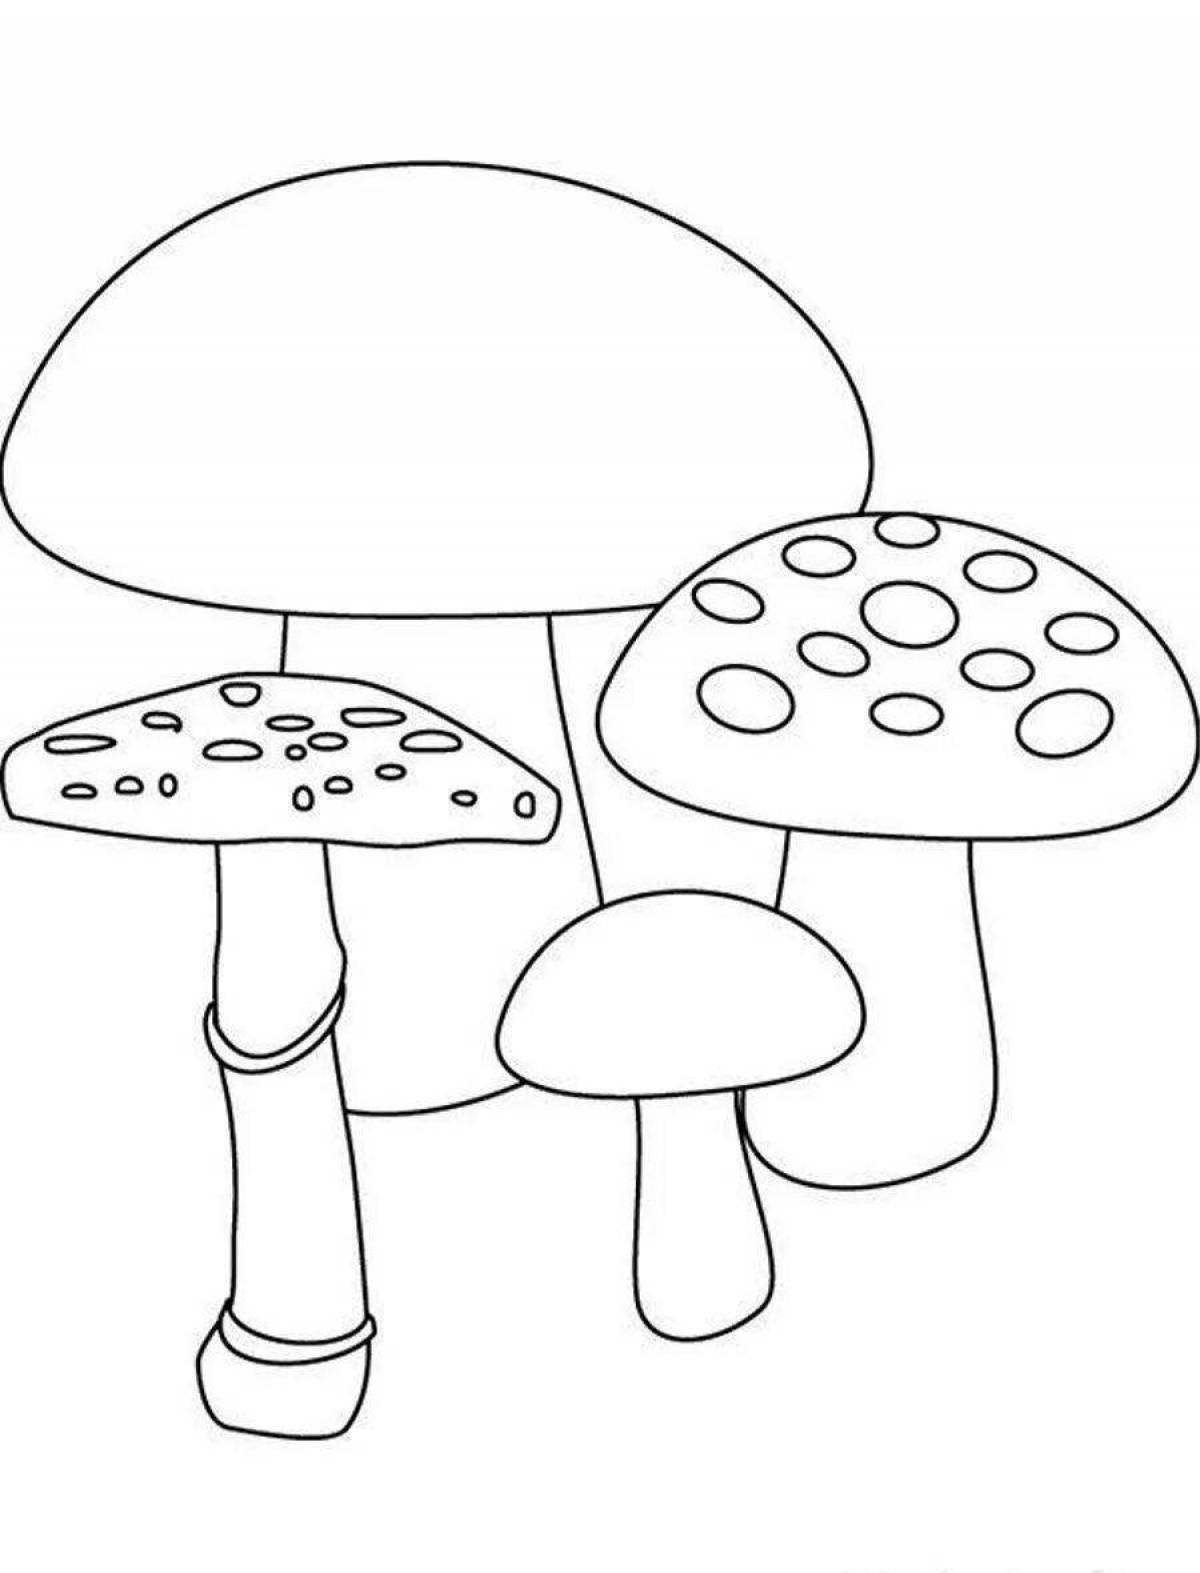 Lovely fly agaric drawing for preschoolers